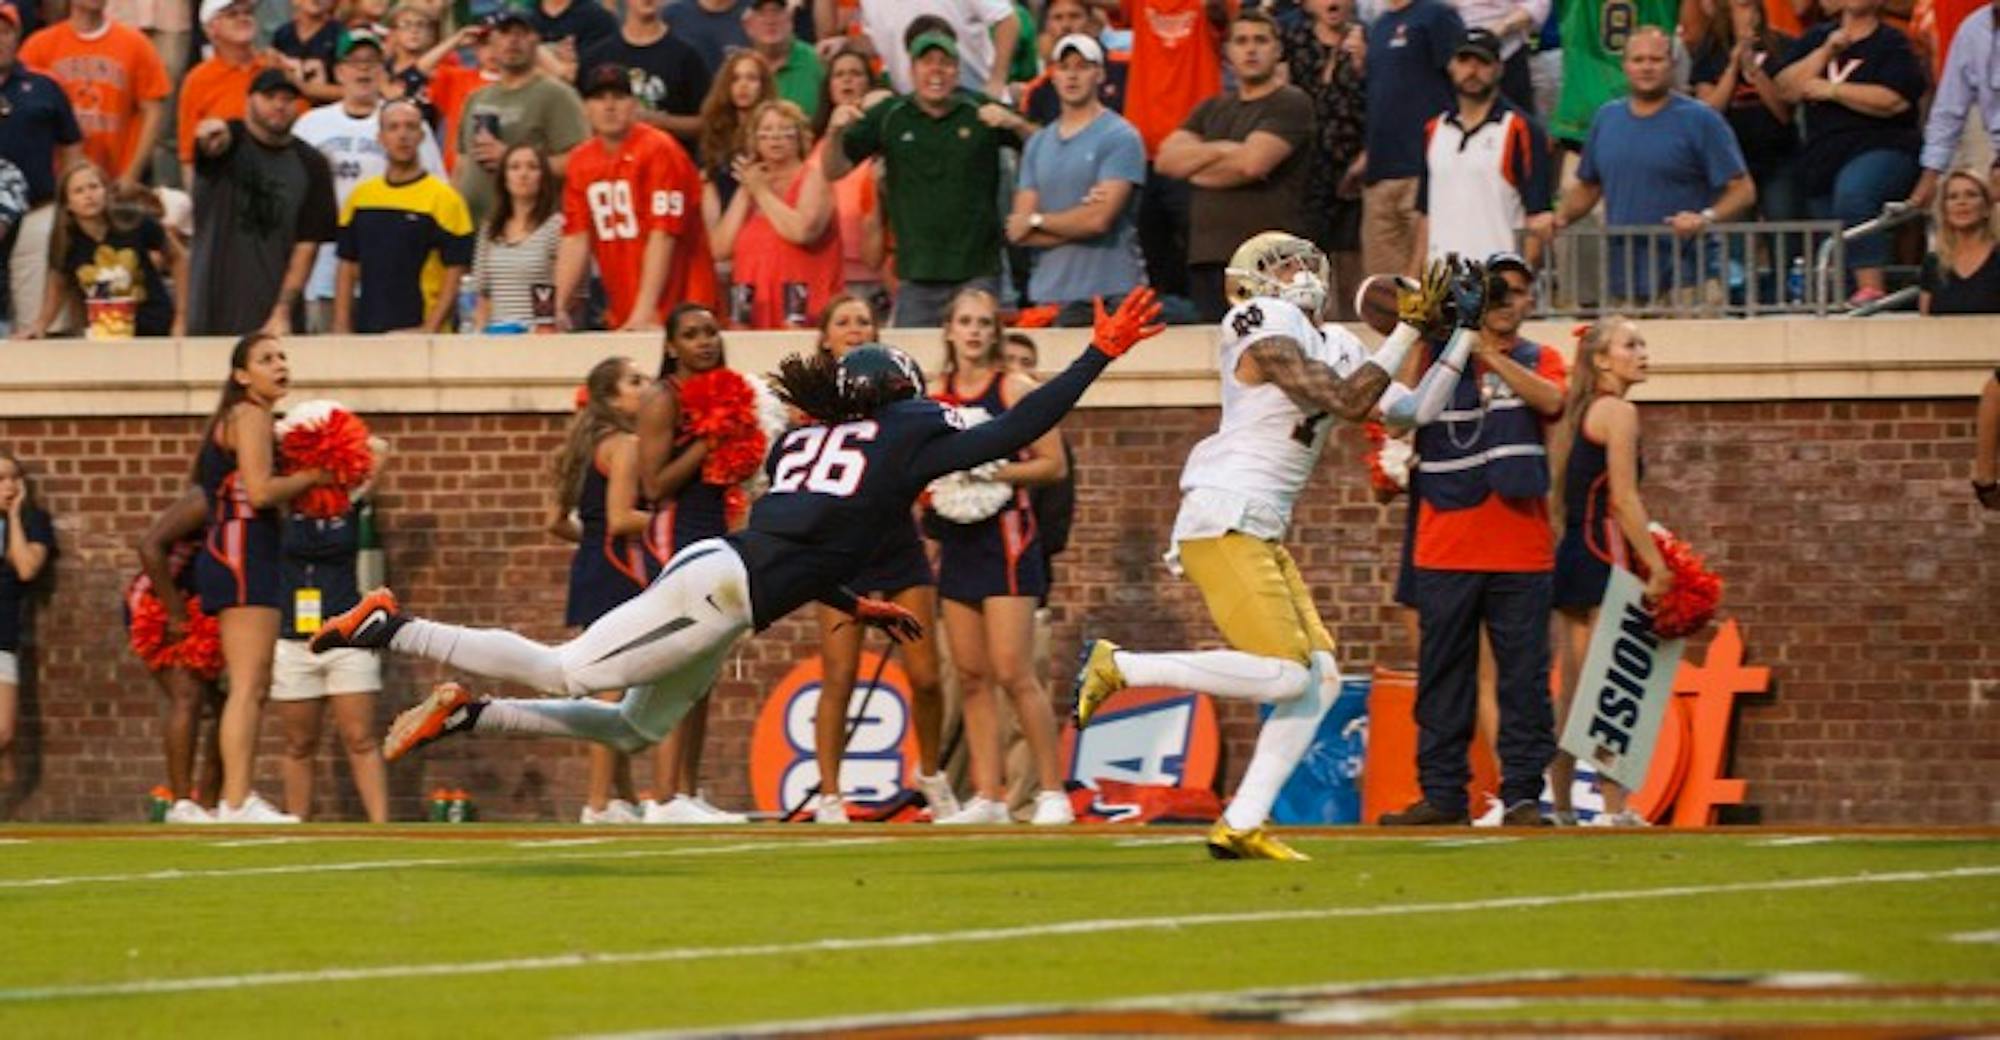 Irish junior receiver Will Fuller hauls in the game-winning touchdown reception with 12 seconds left to push Notre Dame past Virginia 34-27 at Scott Stadium in Charlottesville, Virginia, on Saturday. The Irish twice led by double digits but needed a late-game drive led by sophomore quarterback DeShone Kizer to top the unranked Cavaliers.